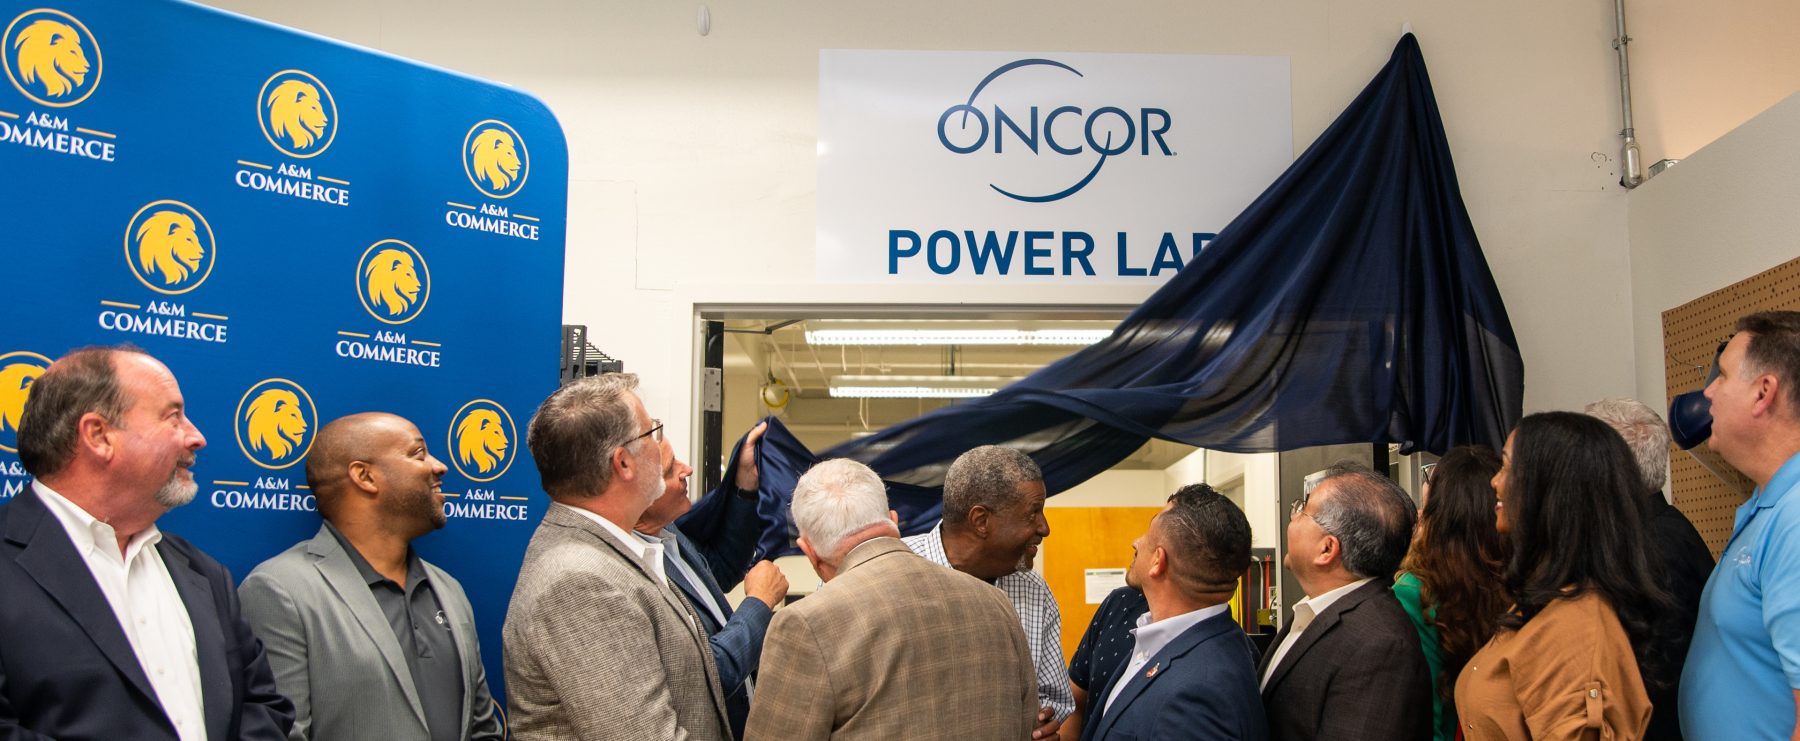 People look above doorway as curtain is pulled down to reveal "Oncor Power Lab" sign.